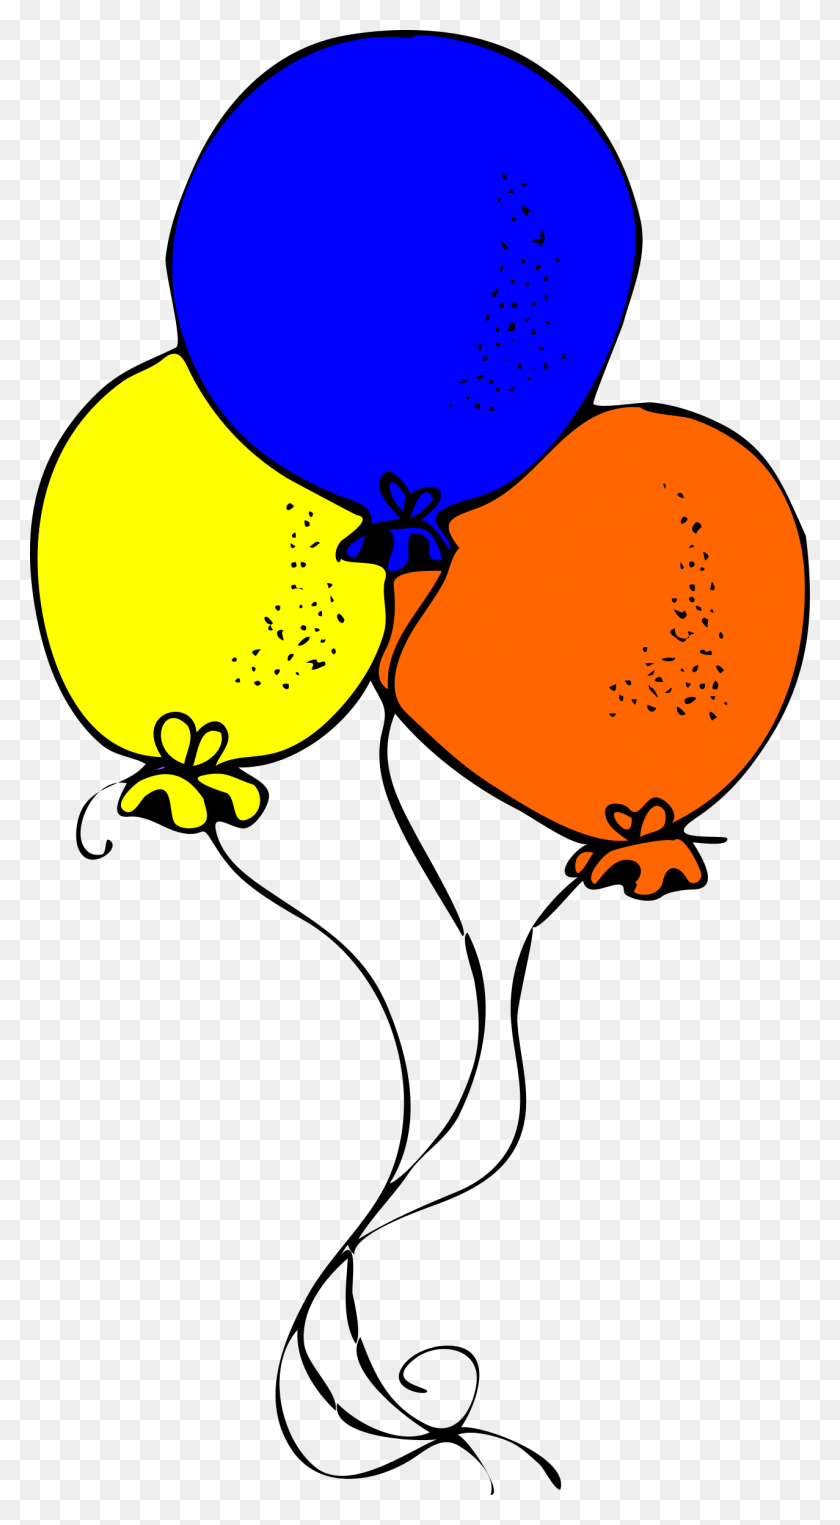 1277x2400 Blue Orange And Yellow Balloons Icons Png - Blue Balloons PNG